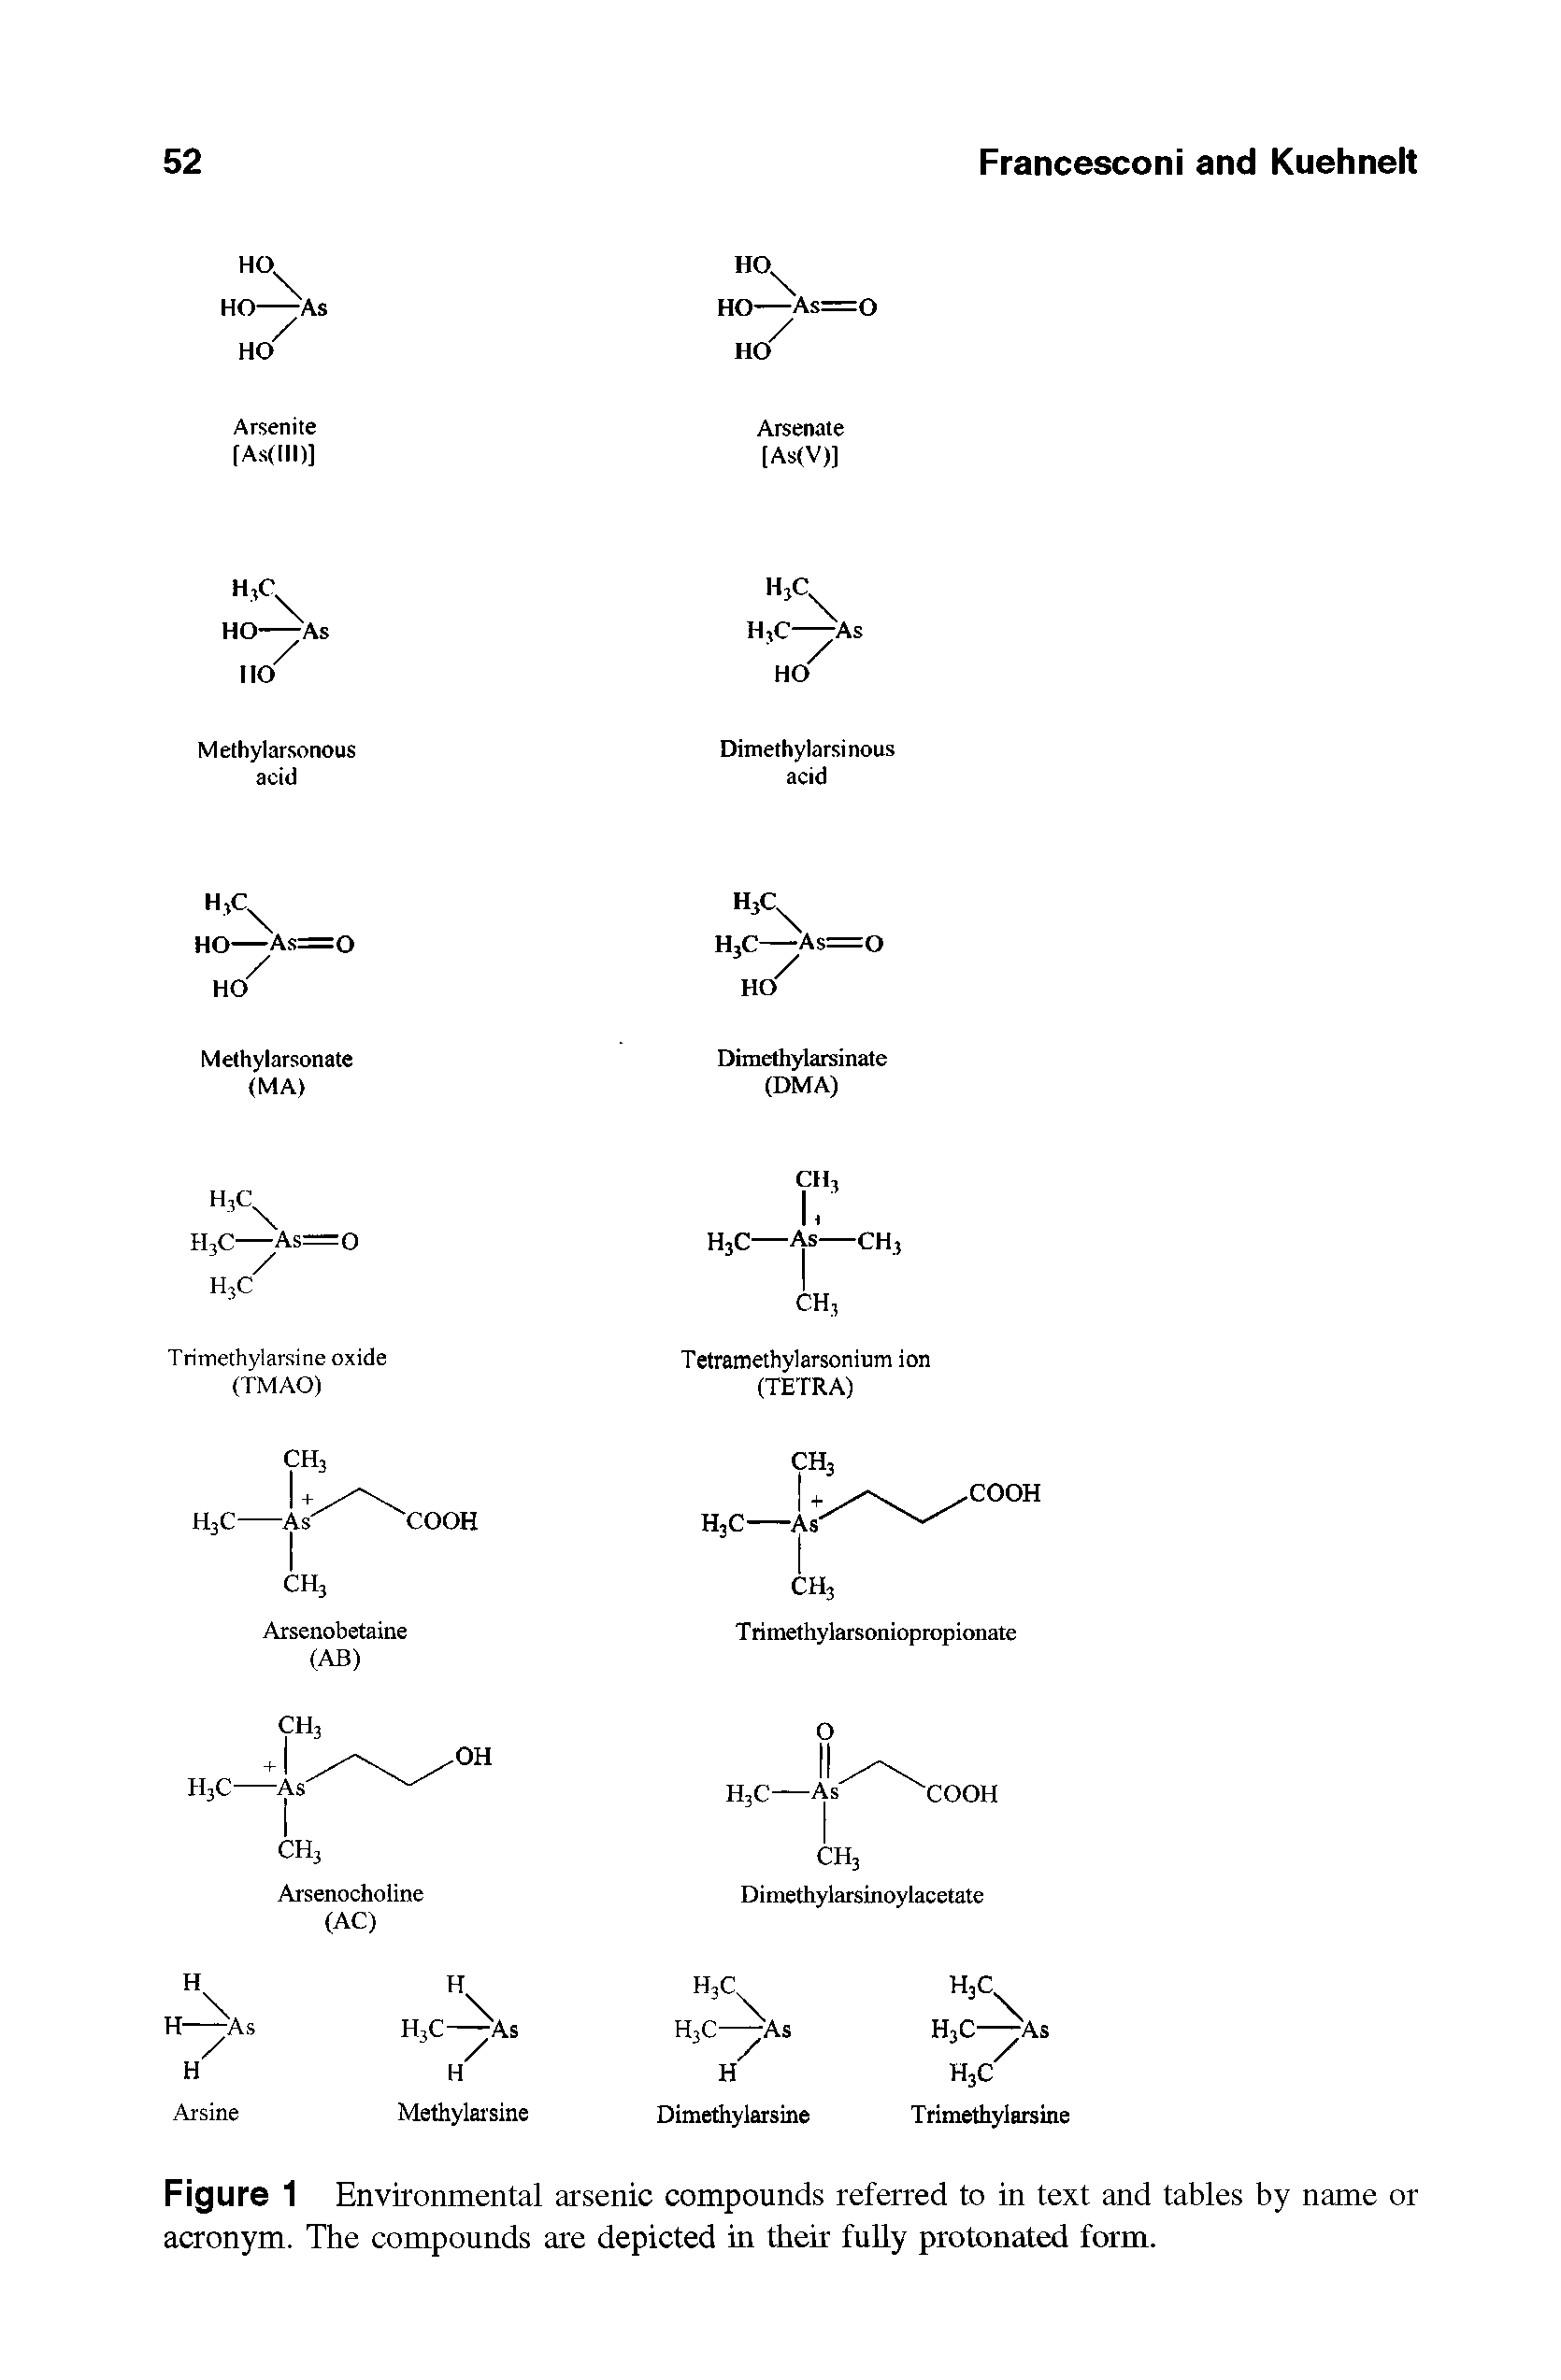 Figure 1 Environmental arsenic compounds referred to in text and tables by name or acronym. The compounds are depicted in their fuUy protonated form.